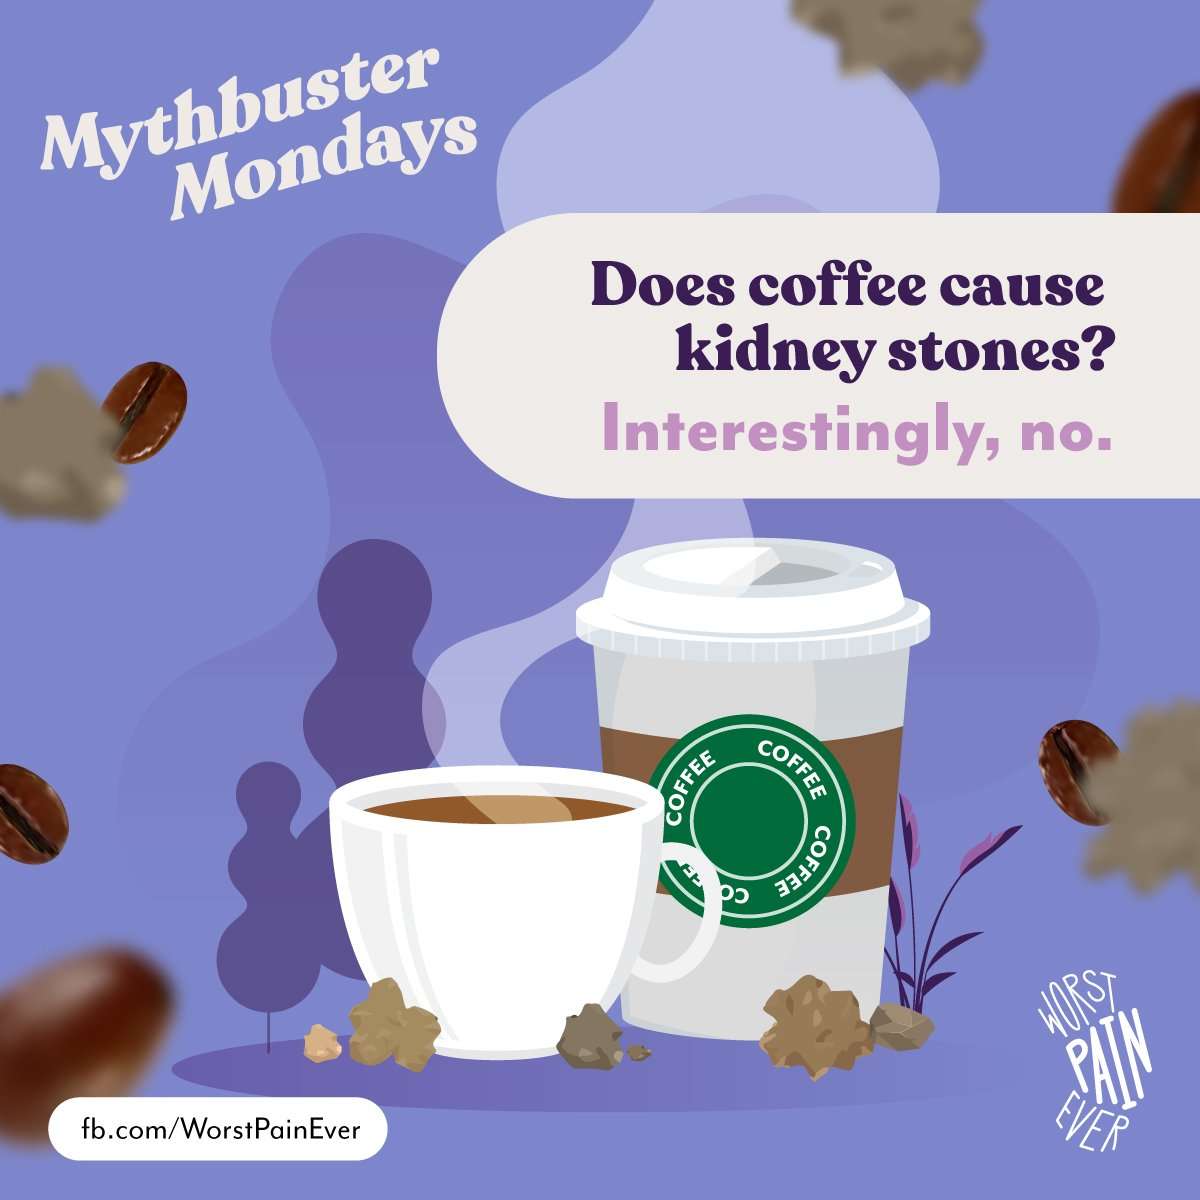 Does coffee cause kidney stones? Interestingly, no ...